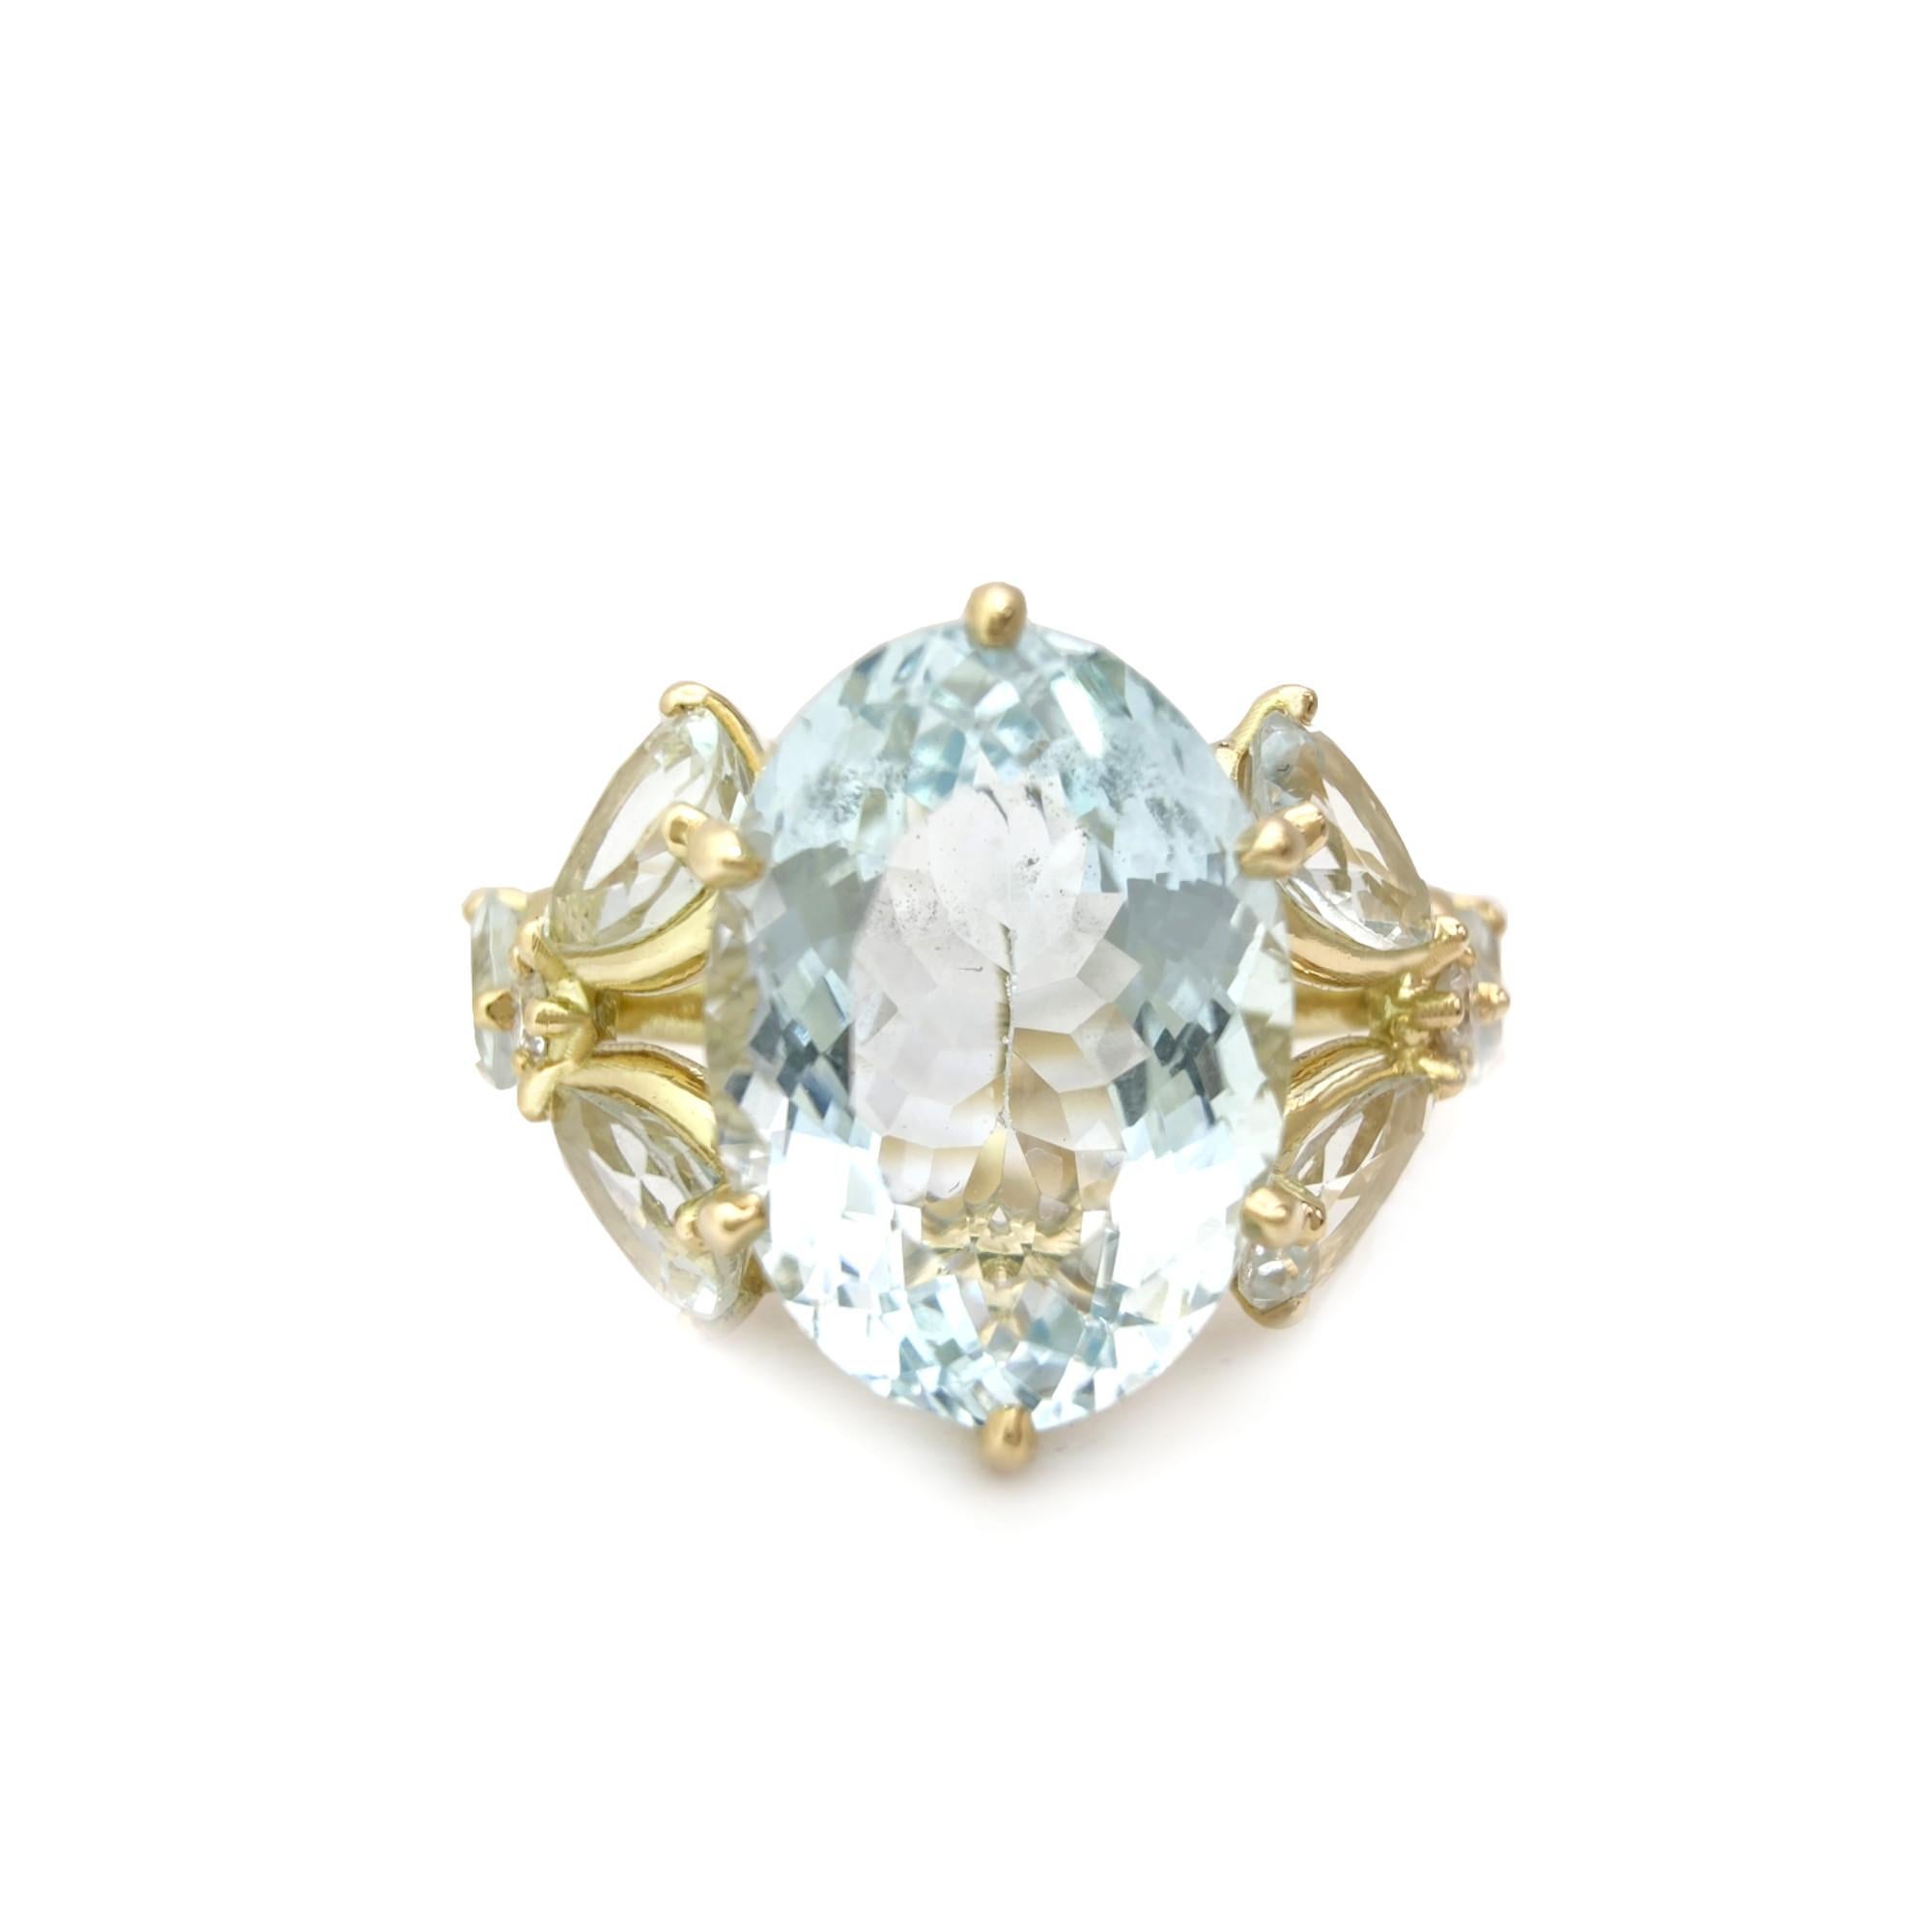 3.47ct Oval Cut Aquamarine and Diamond Engagement Ring in 18K Yellow Gold For Sale 2